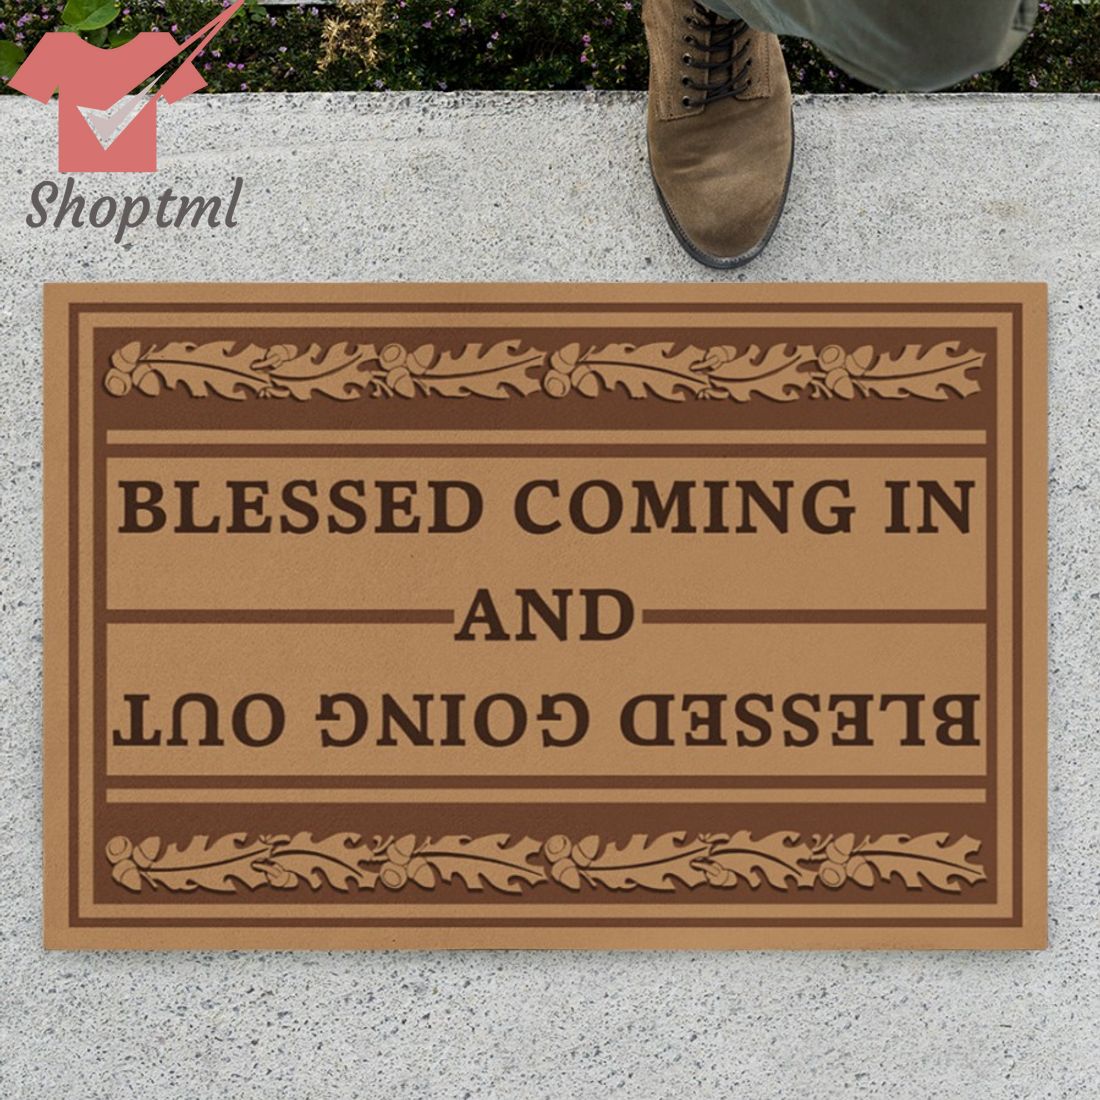 Blessed Coming In And Blessed Going Out Doormat